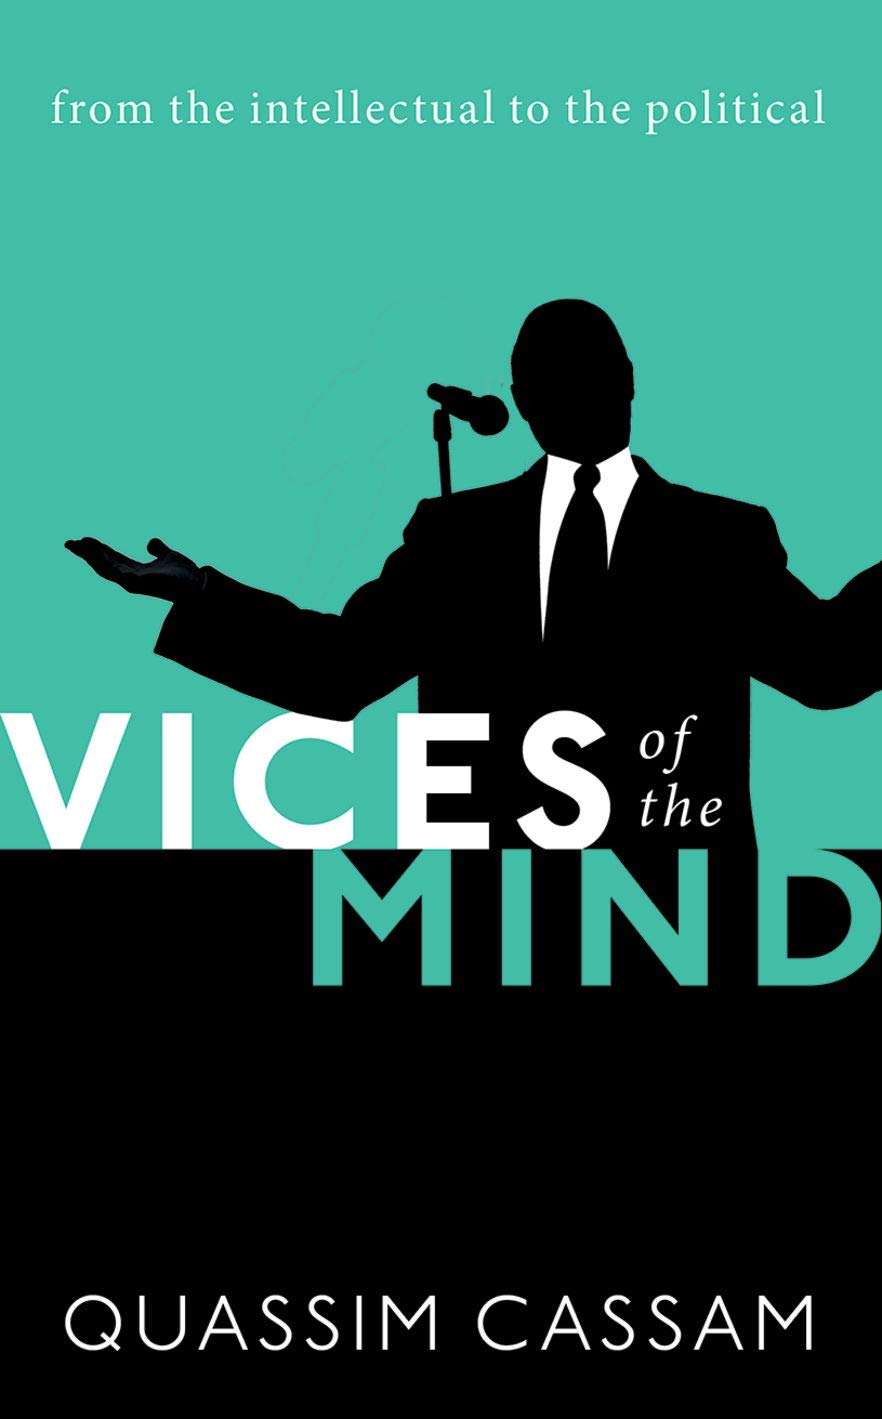 Vices of the Mind: From the Intellectual to the Political, book cover.